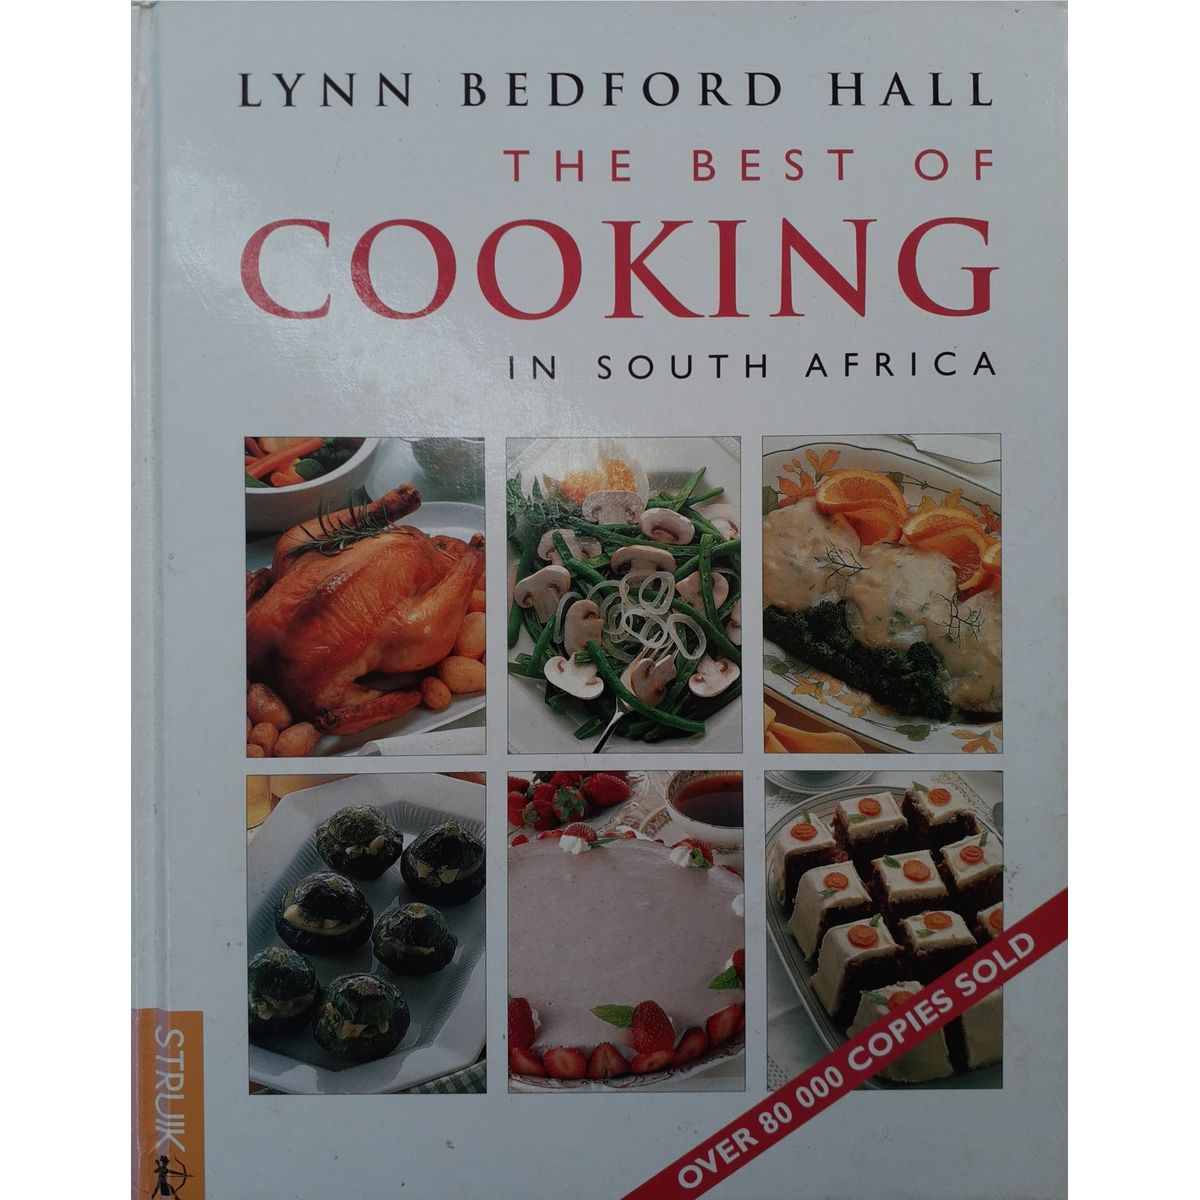 ISBN: 9781868725199 / 1868725197 - The Best of Cooking in South Africa by Lynn Bedford Hall [2000]